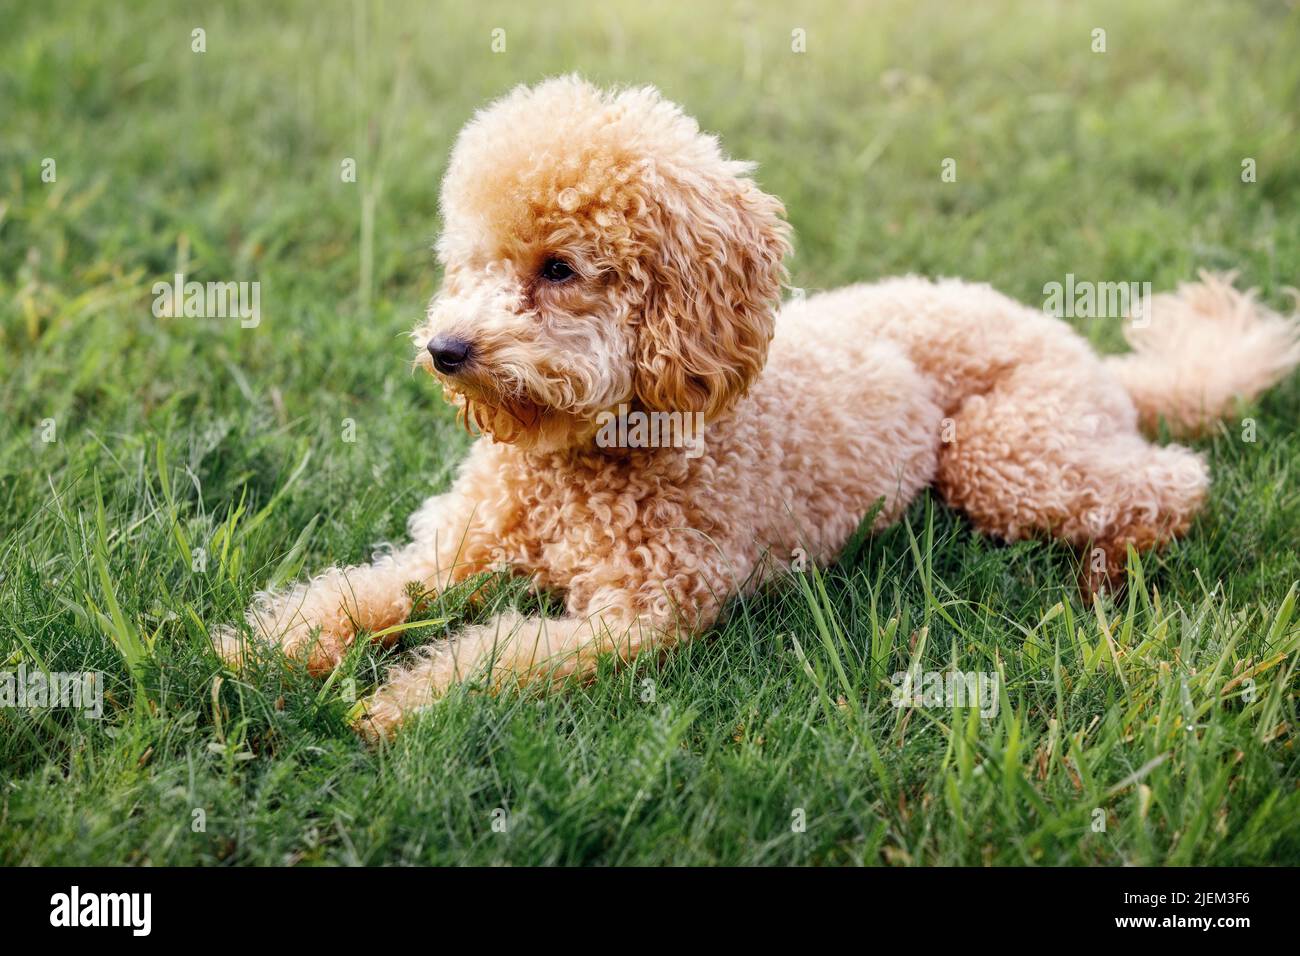 Apricot puppy, small poodle dog posing in front of camera. Small dog in cute pose laying on the grass background and resting. Stock Photo